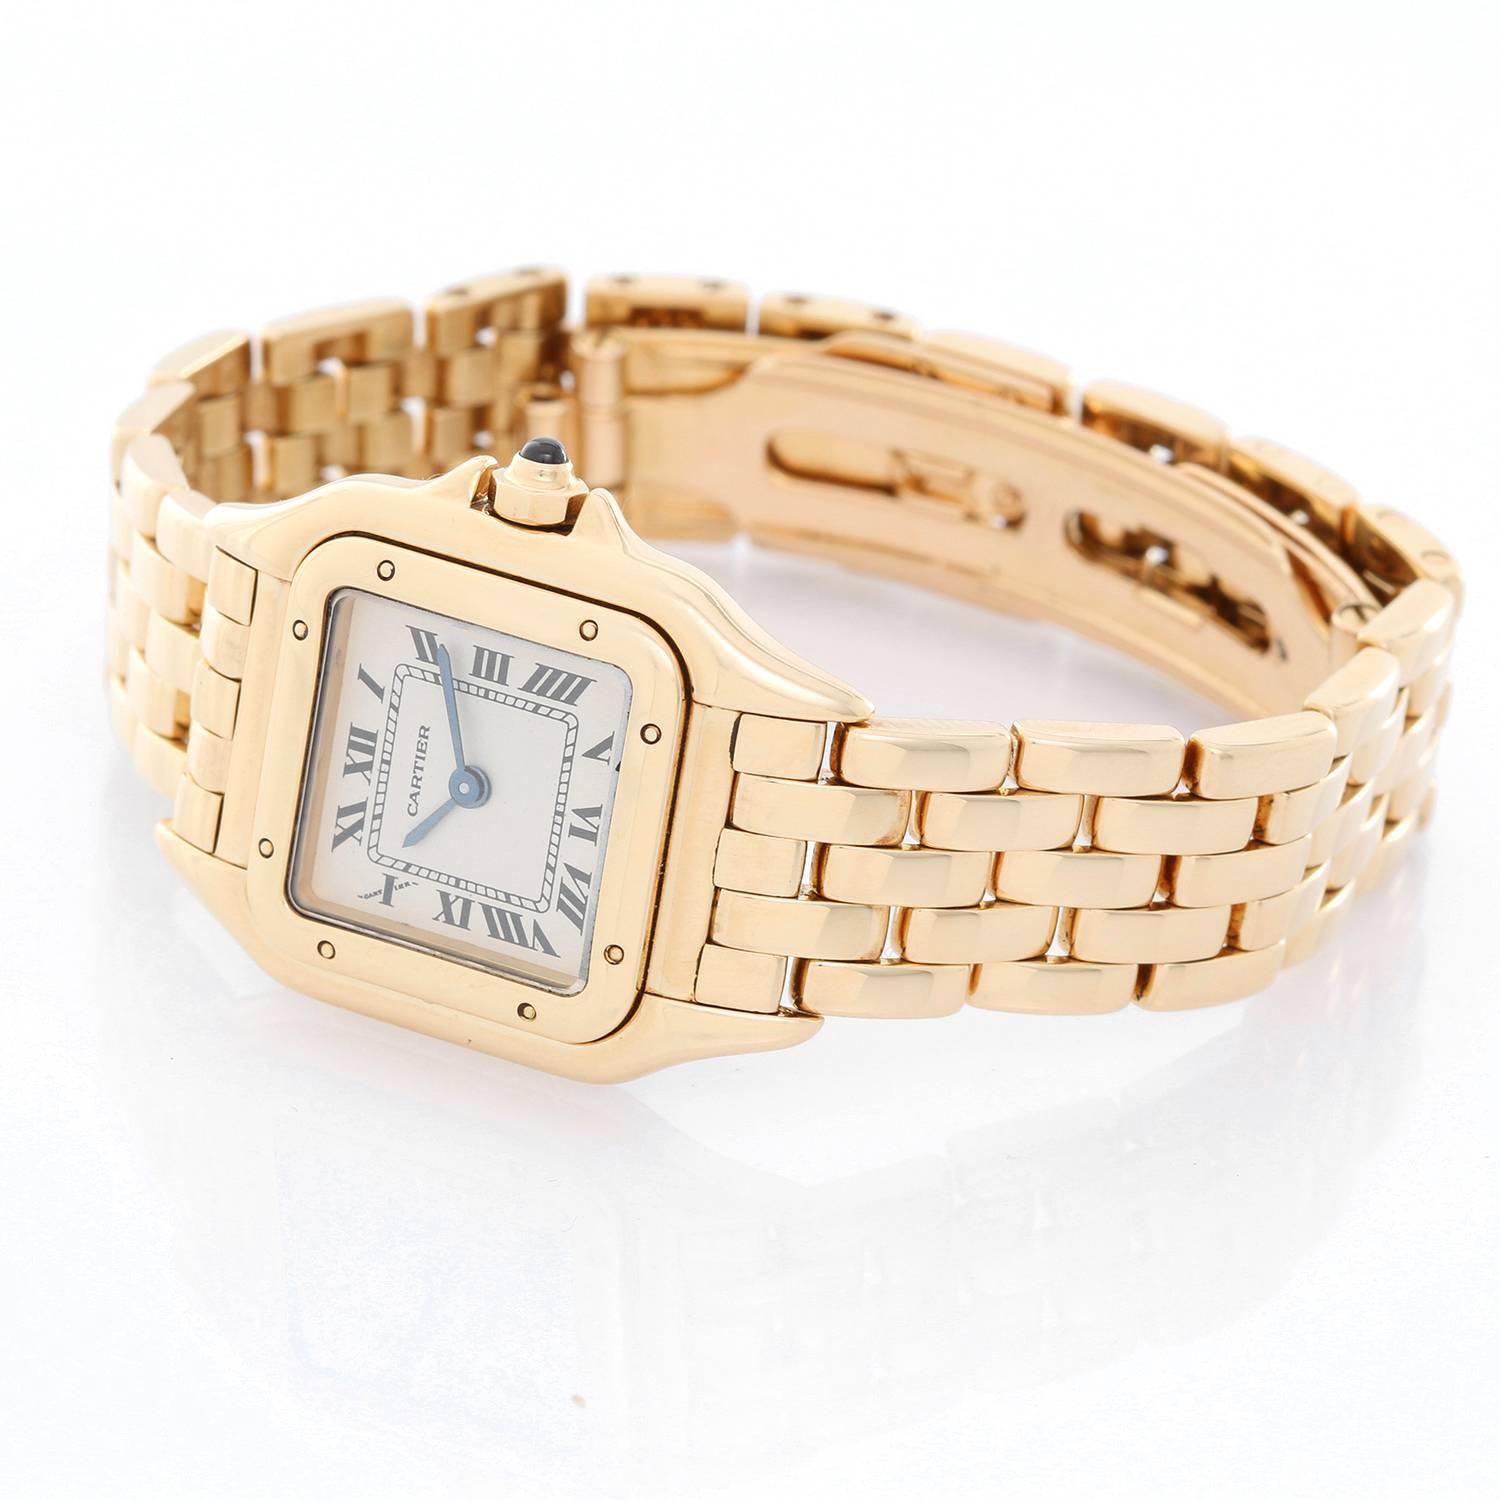 Cartier Panther Ladies 18k Yellow Gold Panthere Watch W25022B9 - Quartz. 18k yellow gold case (21mm x 30mm).  Ivory colored dial with black Roman numerals. 18k yellow gold Panther bracelet. Pre-owned with box and book.